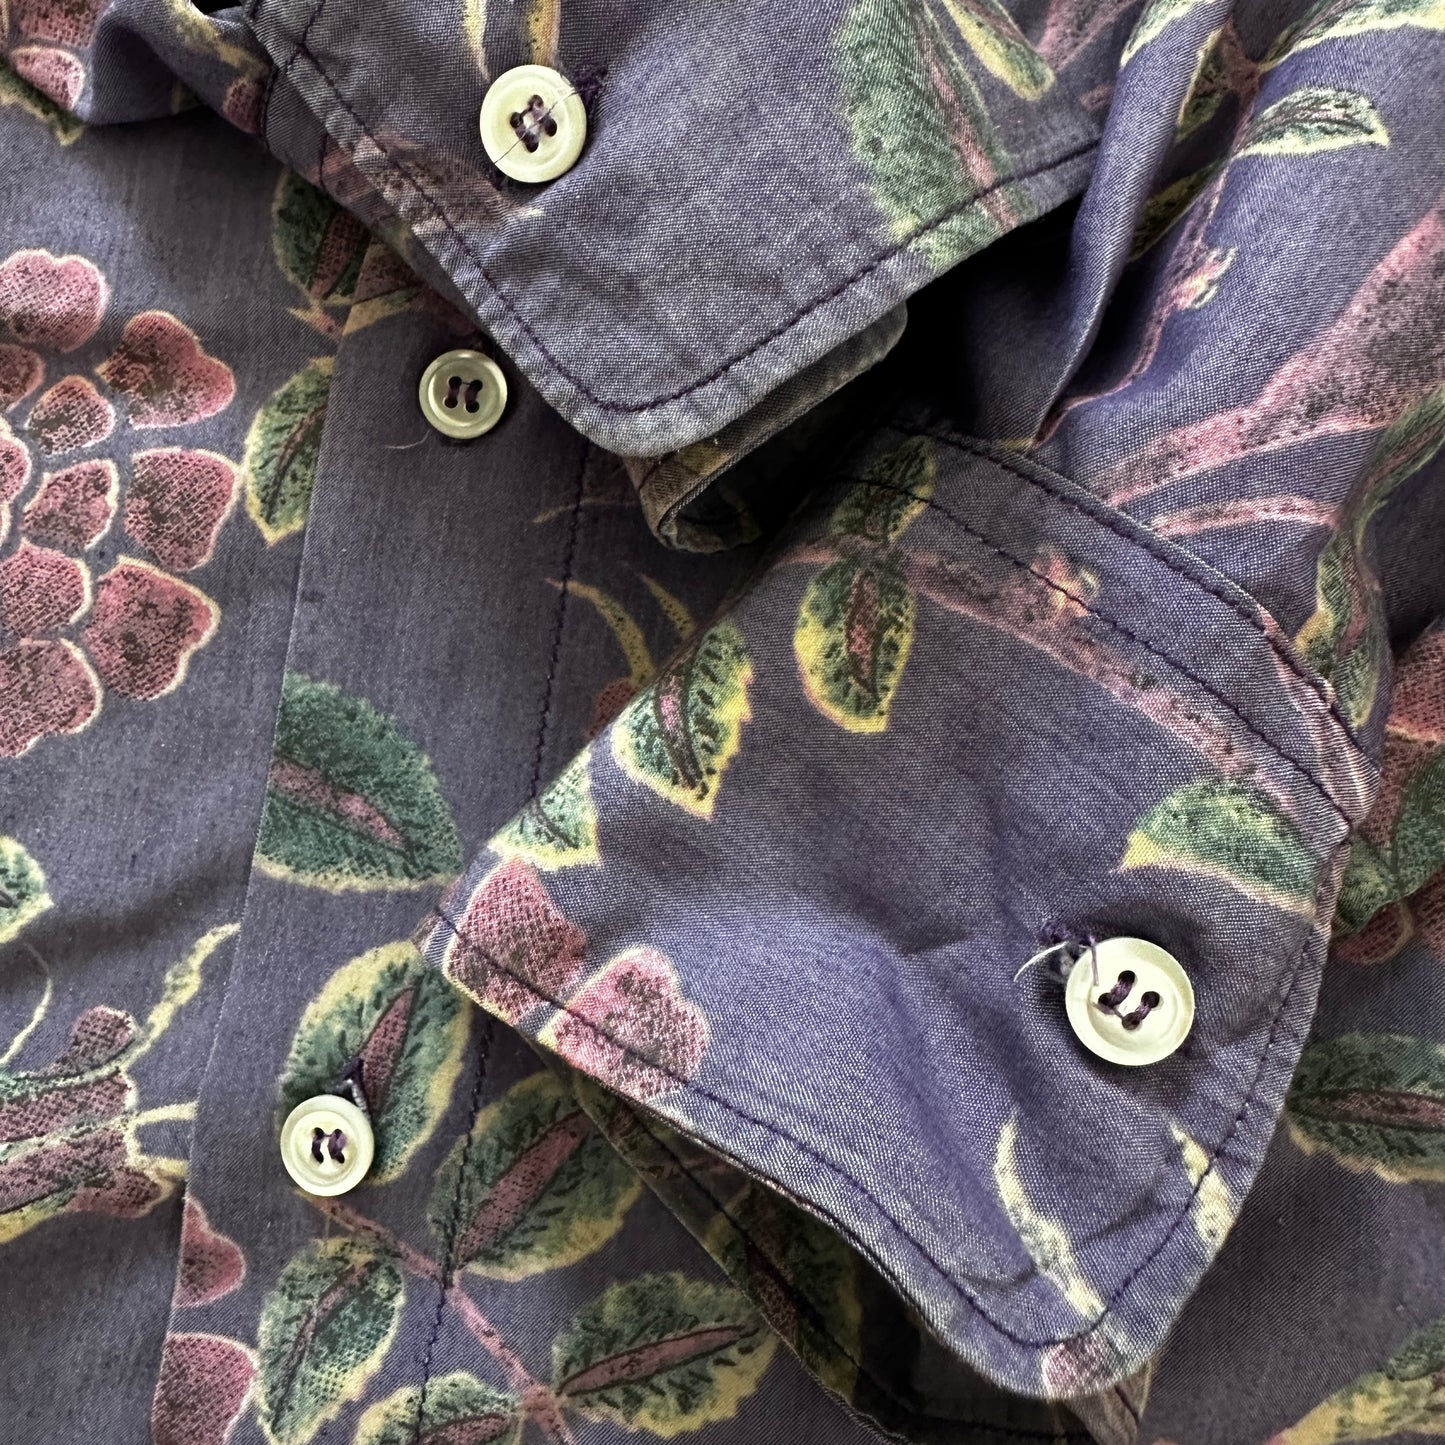 C.P. Company Vintage 1989 Floral Button Down Viscose Shirt - 6 / XL - Made in Italy